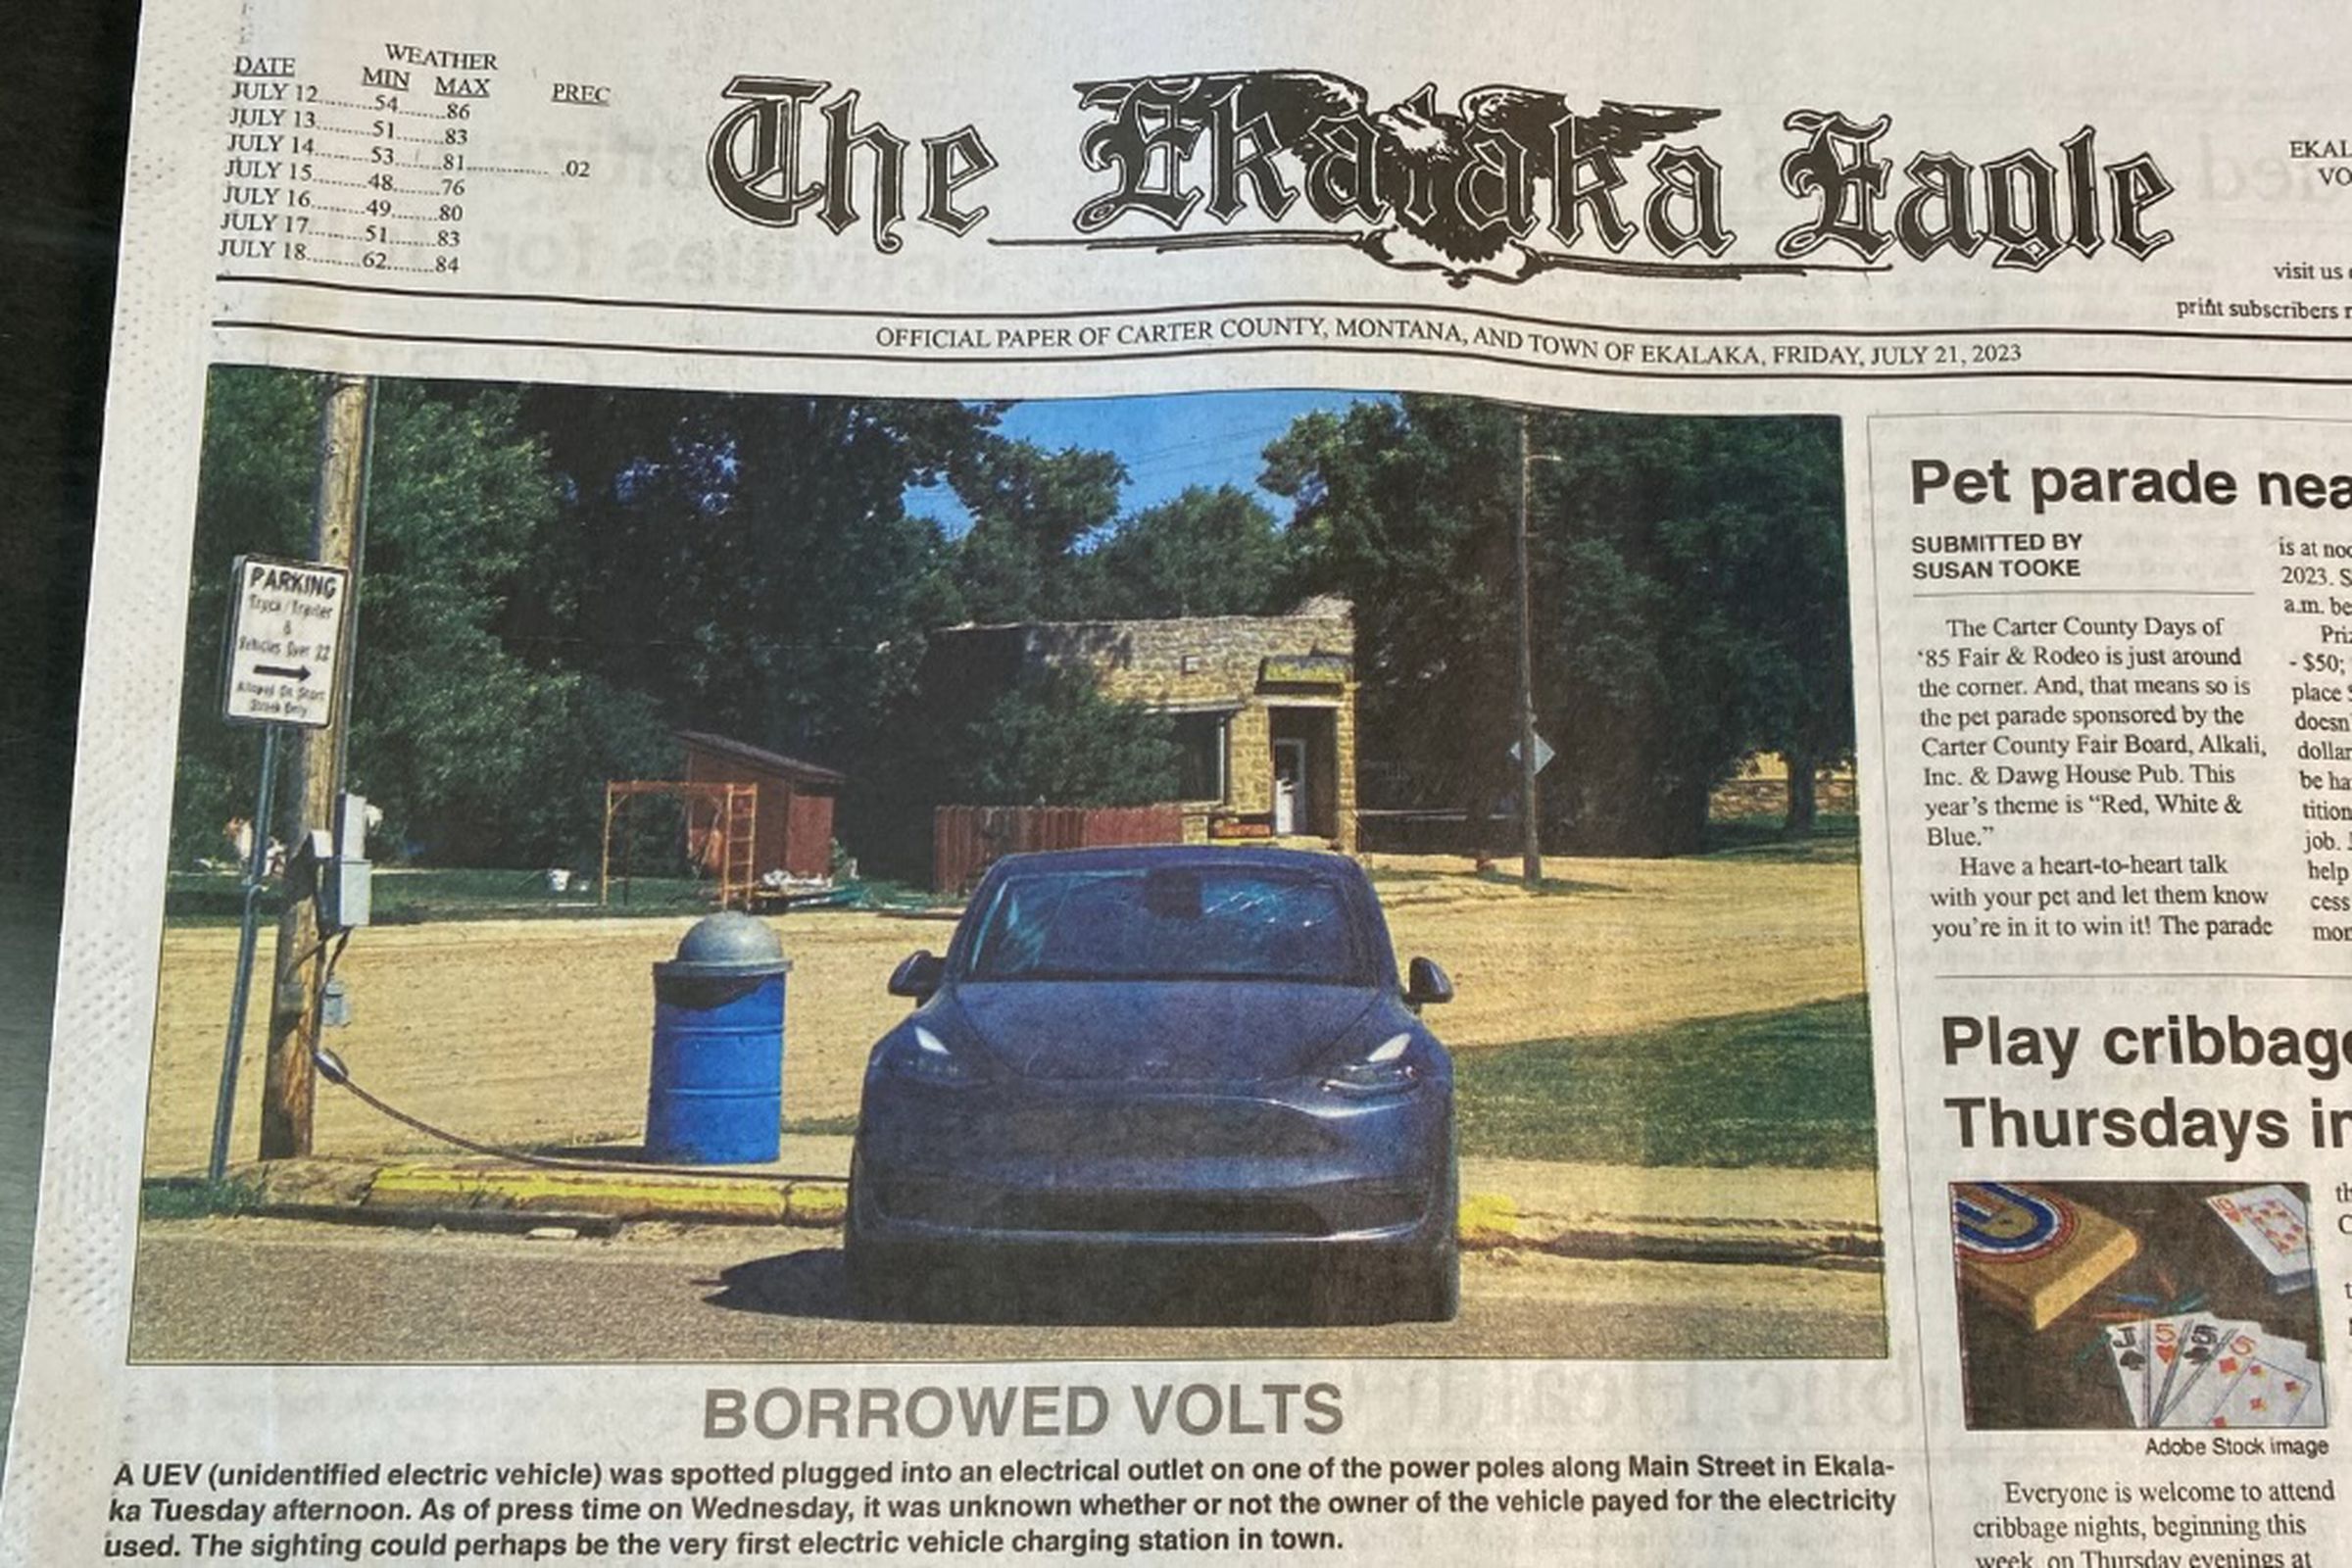 Newspaper front page shows black Tesla model Y on a small main street plugged into a pole